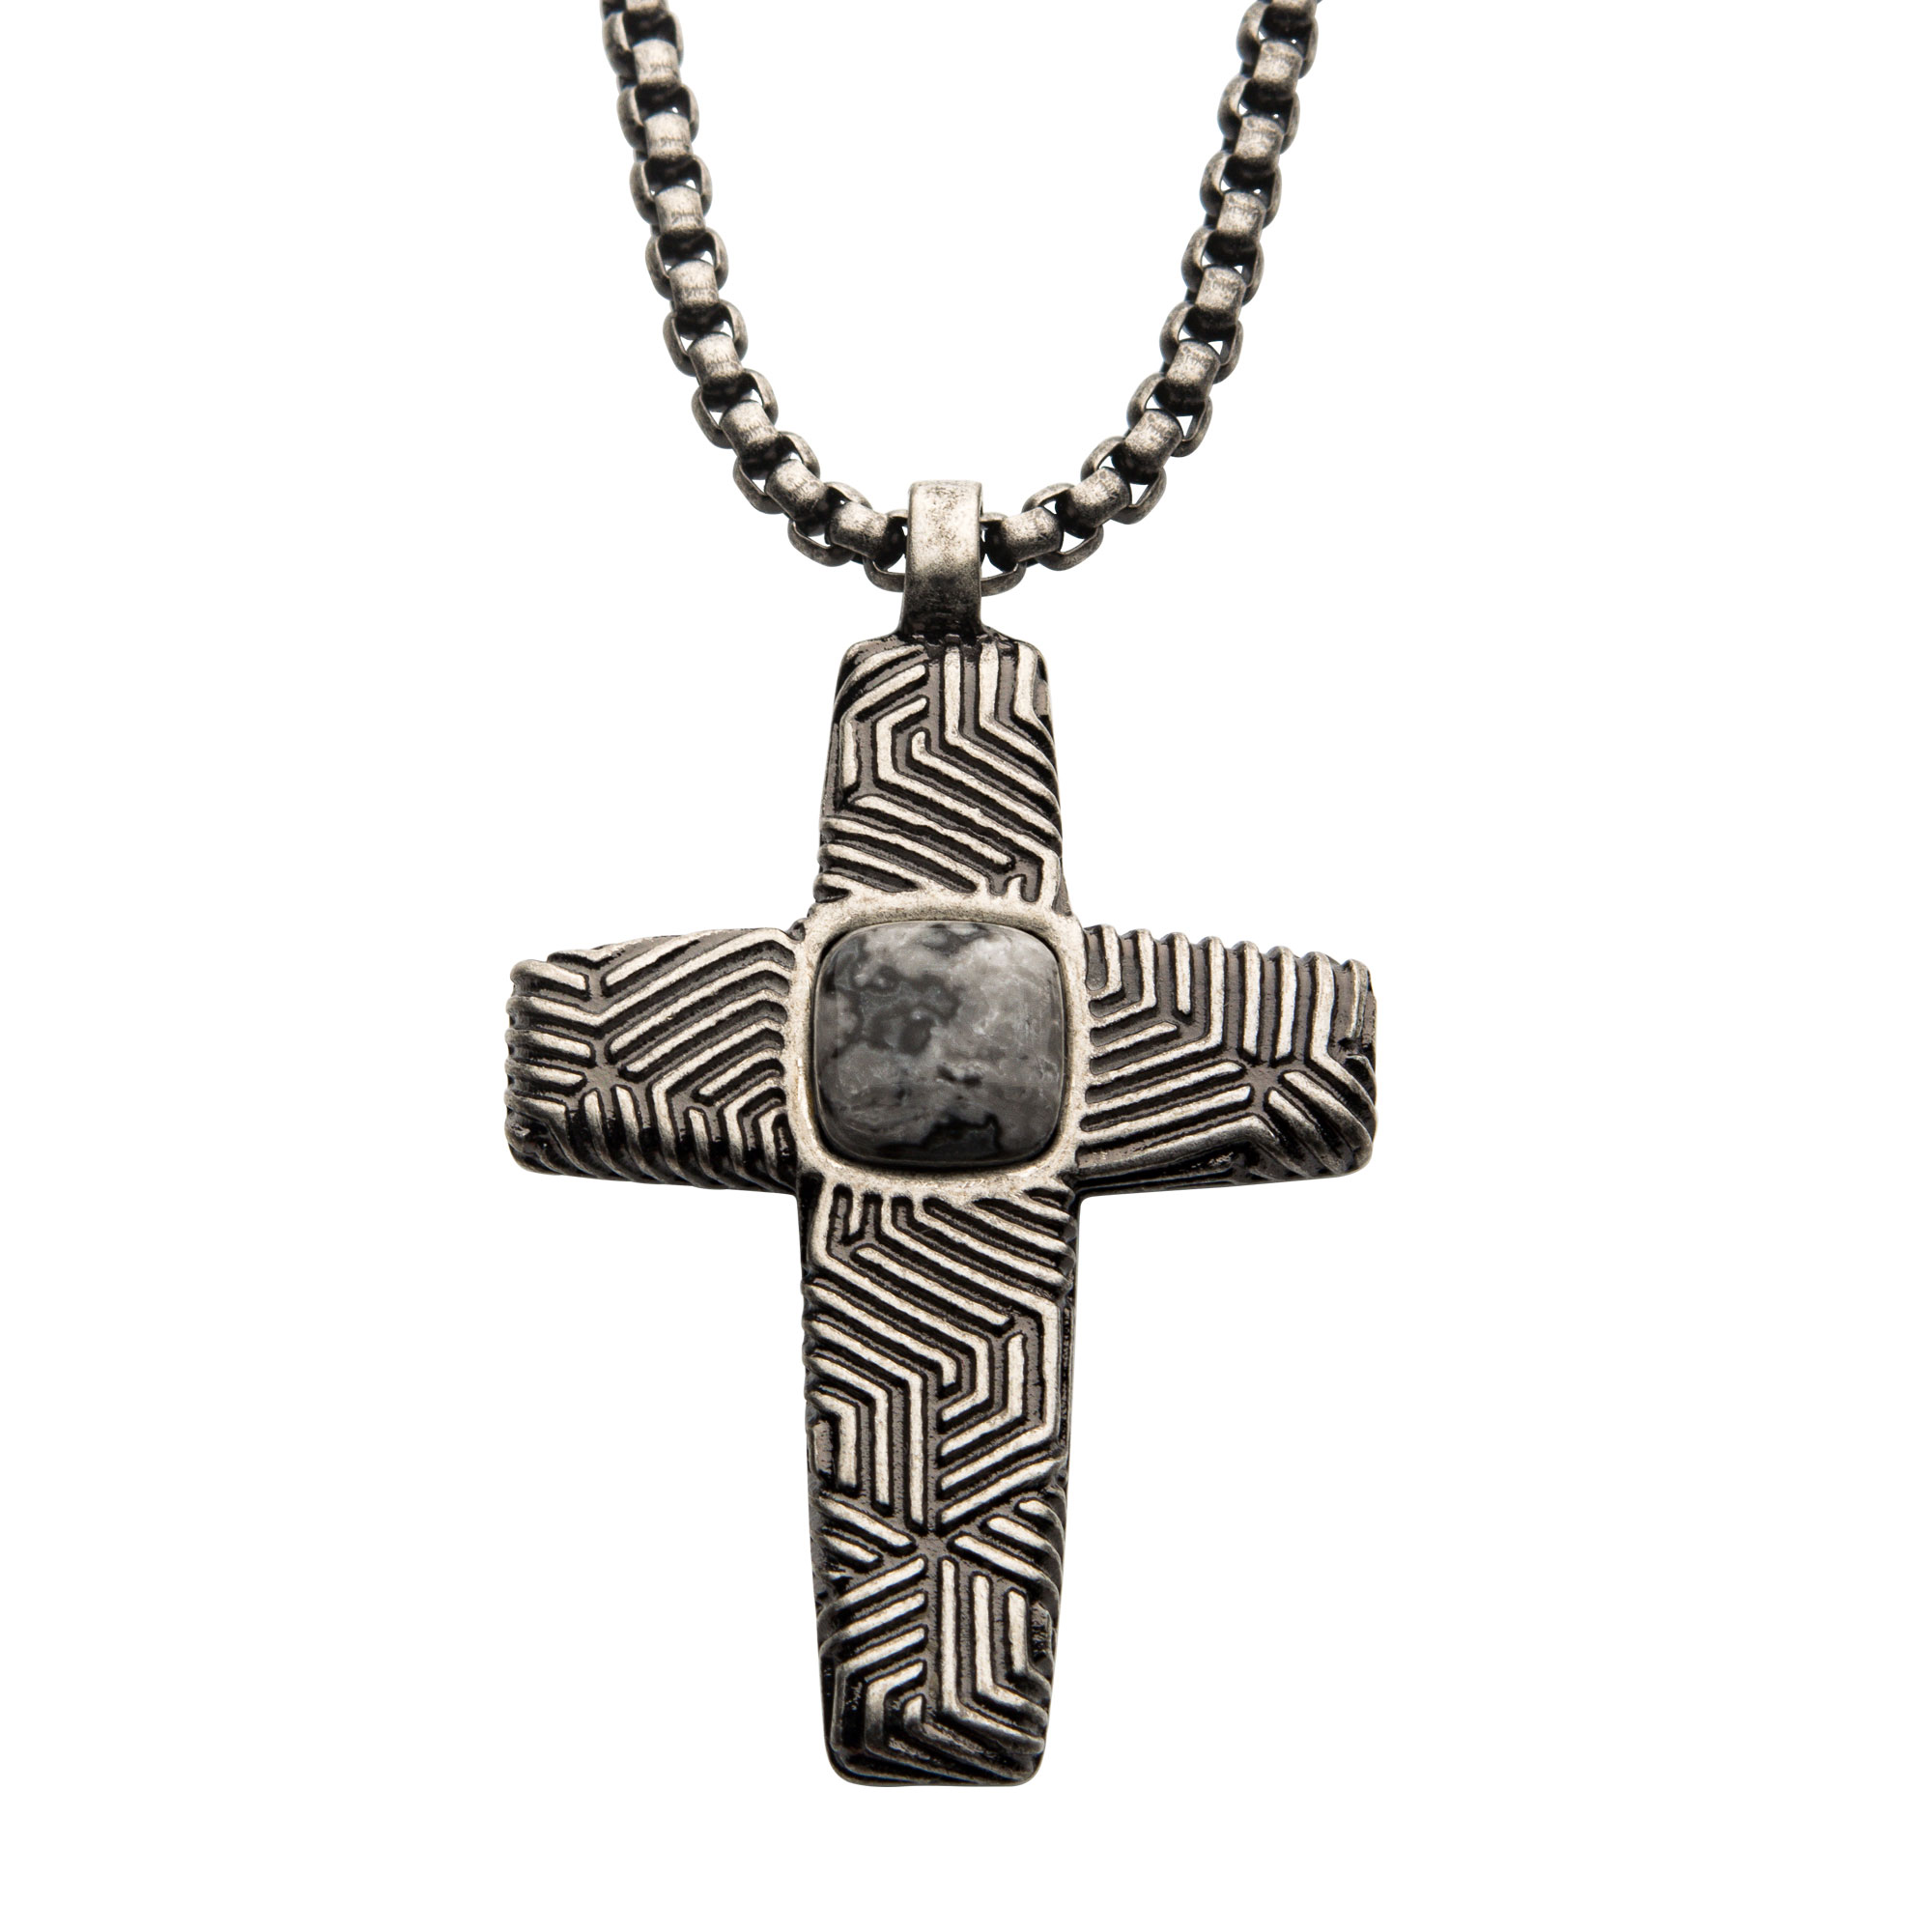 Stainless Steel Silver Plated Cross Pendant with Gray Jasper Stone, with Steel Box Chain Morin Jewelers Southbridge, MA